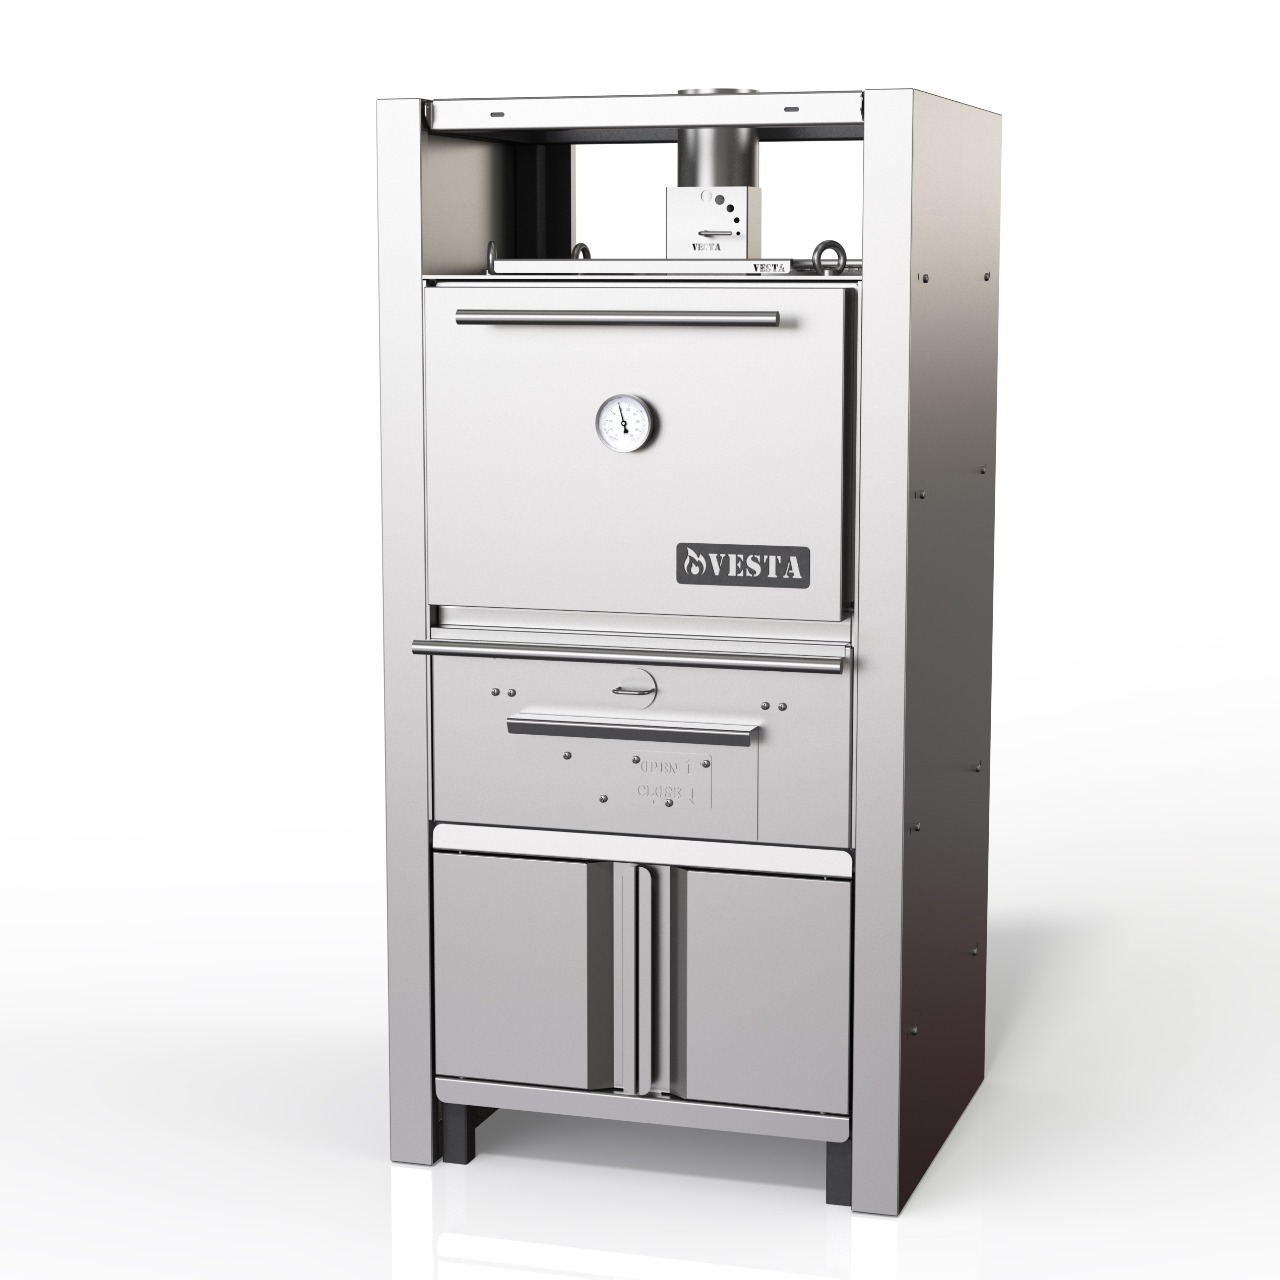 VESTA 25 S -closed charcoal grill with the stand with heating cabinet